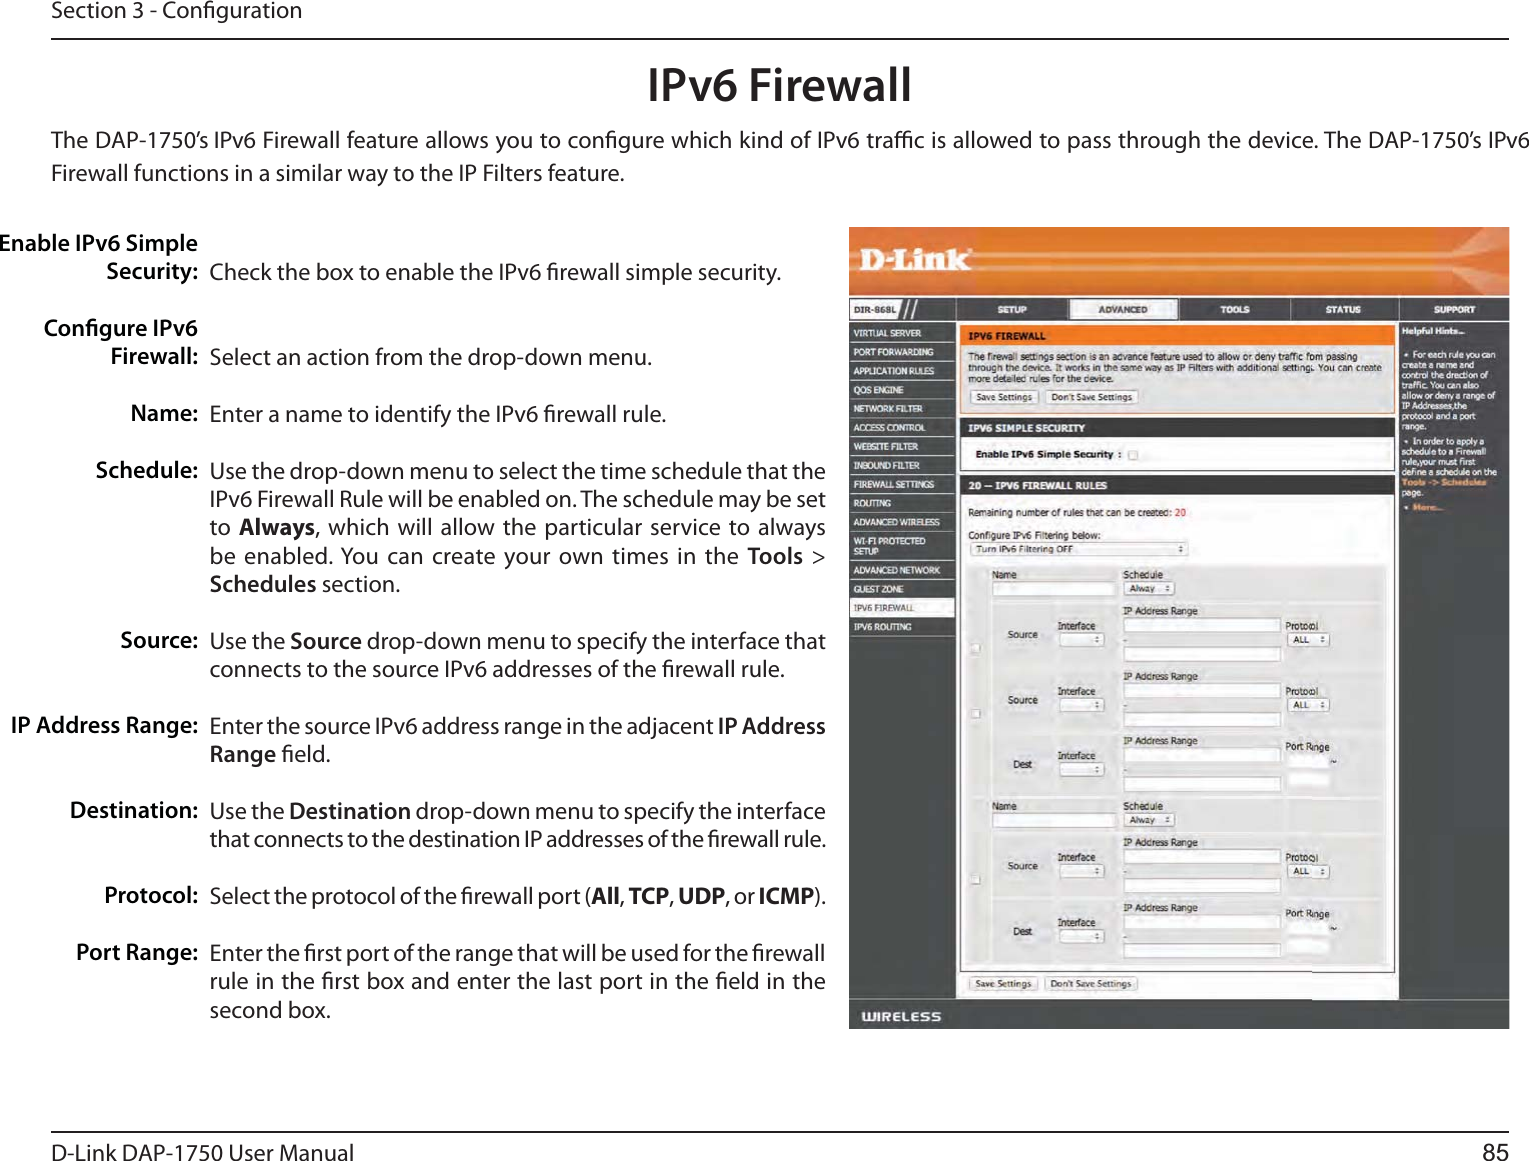 D-Link %&quot;1 User ManualSection 3 - CongurationIPv6 FirewallThe DAP-1750’s  IPv6 Firewall feature allows you to congure which kind of IPv6 trac is allowed to pass through the device. The DAP-1750’s IPv6 Firewall functions in a similar way to the IP Filters feature.Check the box to enable the IPv6 rewall simple security.Select an action from the drop-down menu.Enter a name to identify the IPv6 rewall rule.Use the drop-down menu to select the time schedule that the IPv6 Firewall Rule will be enabled on. The schedule may be set to  Always, which will allow the particular service to always be enabled. You can create your own times in the Tools &gt; Schedules section. Use the Source drop-down menu to specify the interface that connects to the source IPv6 addresses of the rewall rule. Enter the source IPv6 address range in the adjacent IP Address Range eld.Use the Destination drop-down menu to specify the interface that connects to the destination IP addresses of the rewall rule. Select the protocol of the rewall port (All, TCP, UDP, or ICMP).Enter the rst port of the range that will be used for the rewall rule in the rst box and enter the last port in the eld in the second box.Enable IPv6 Simple  Security:Congure IPv6 Firewall:Name:Schedule:Source:IP Address Range:Destination:Protocol:Port Range:85